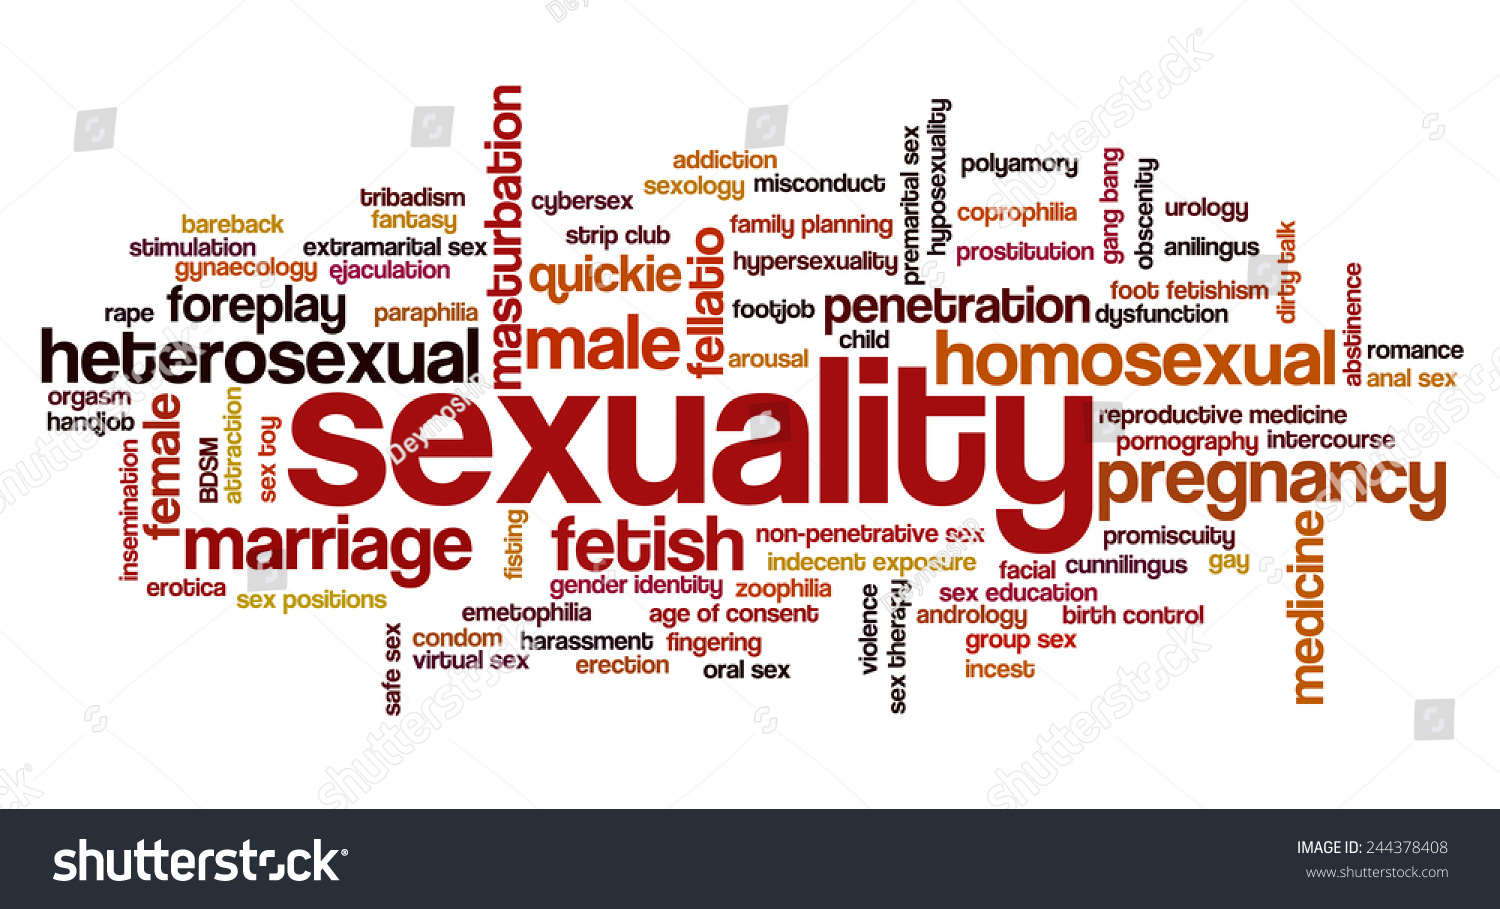 Word Cloud Illustrating Words Related To Human Sexuality Stock Vector Illustration 244378408 7874